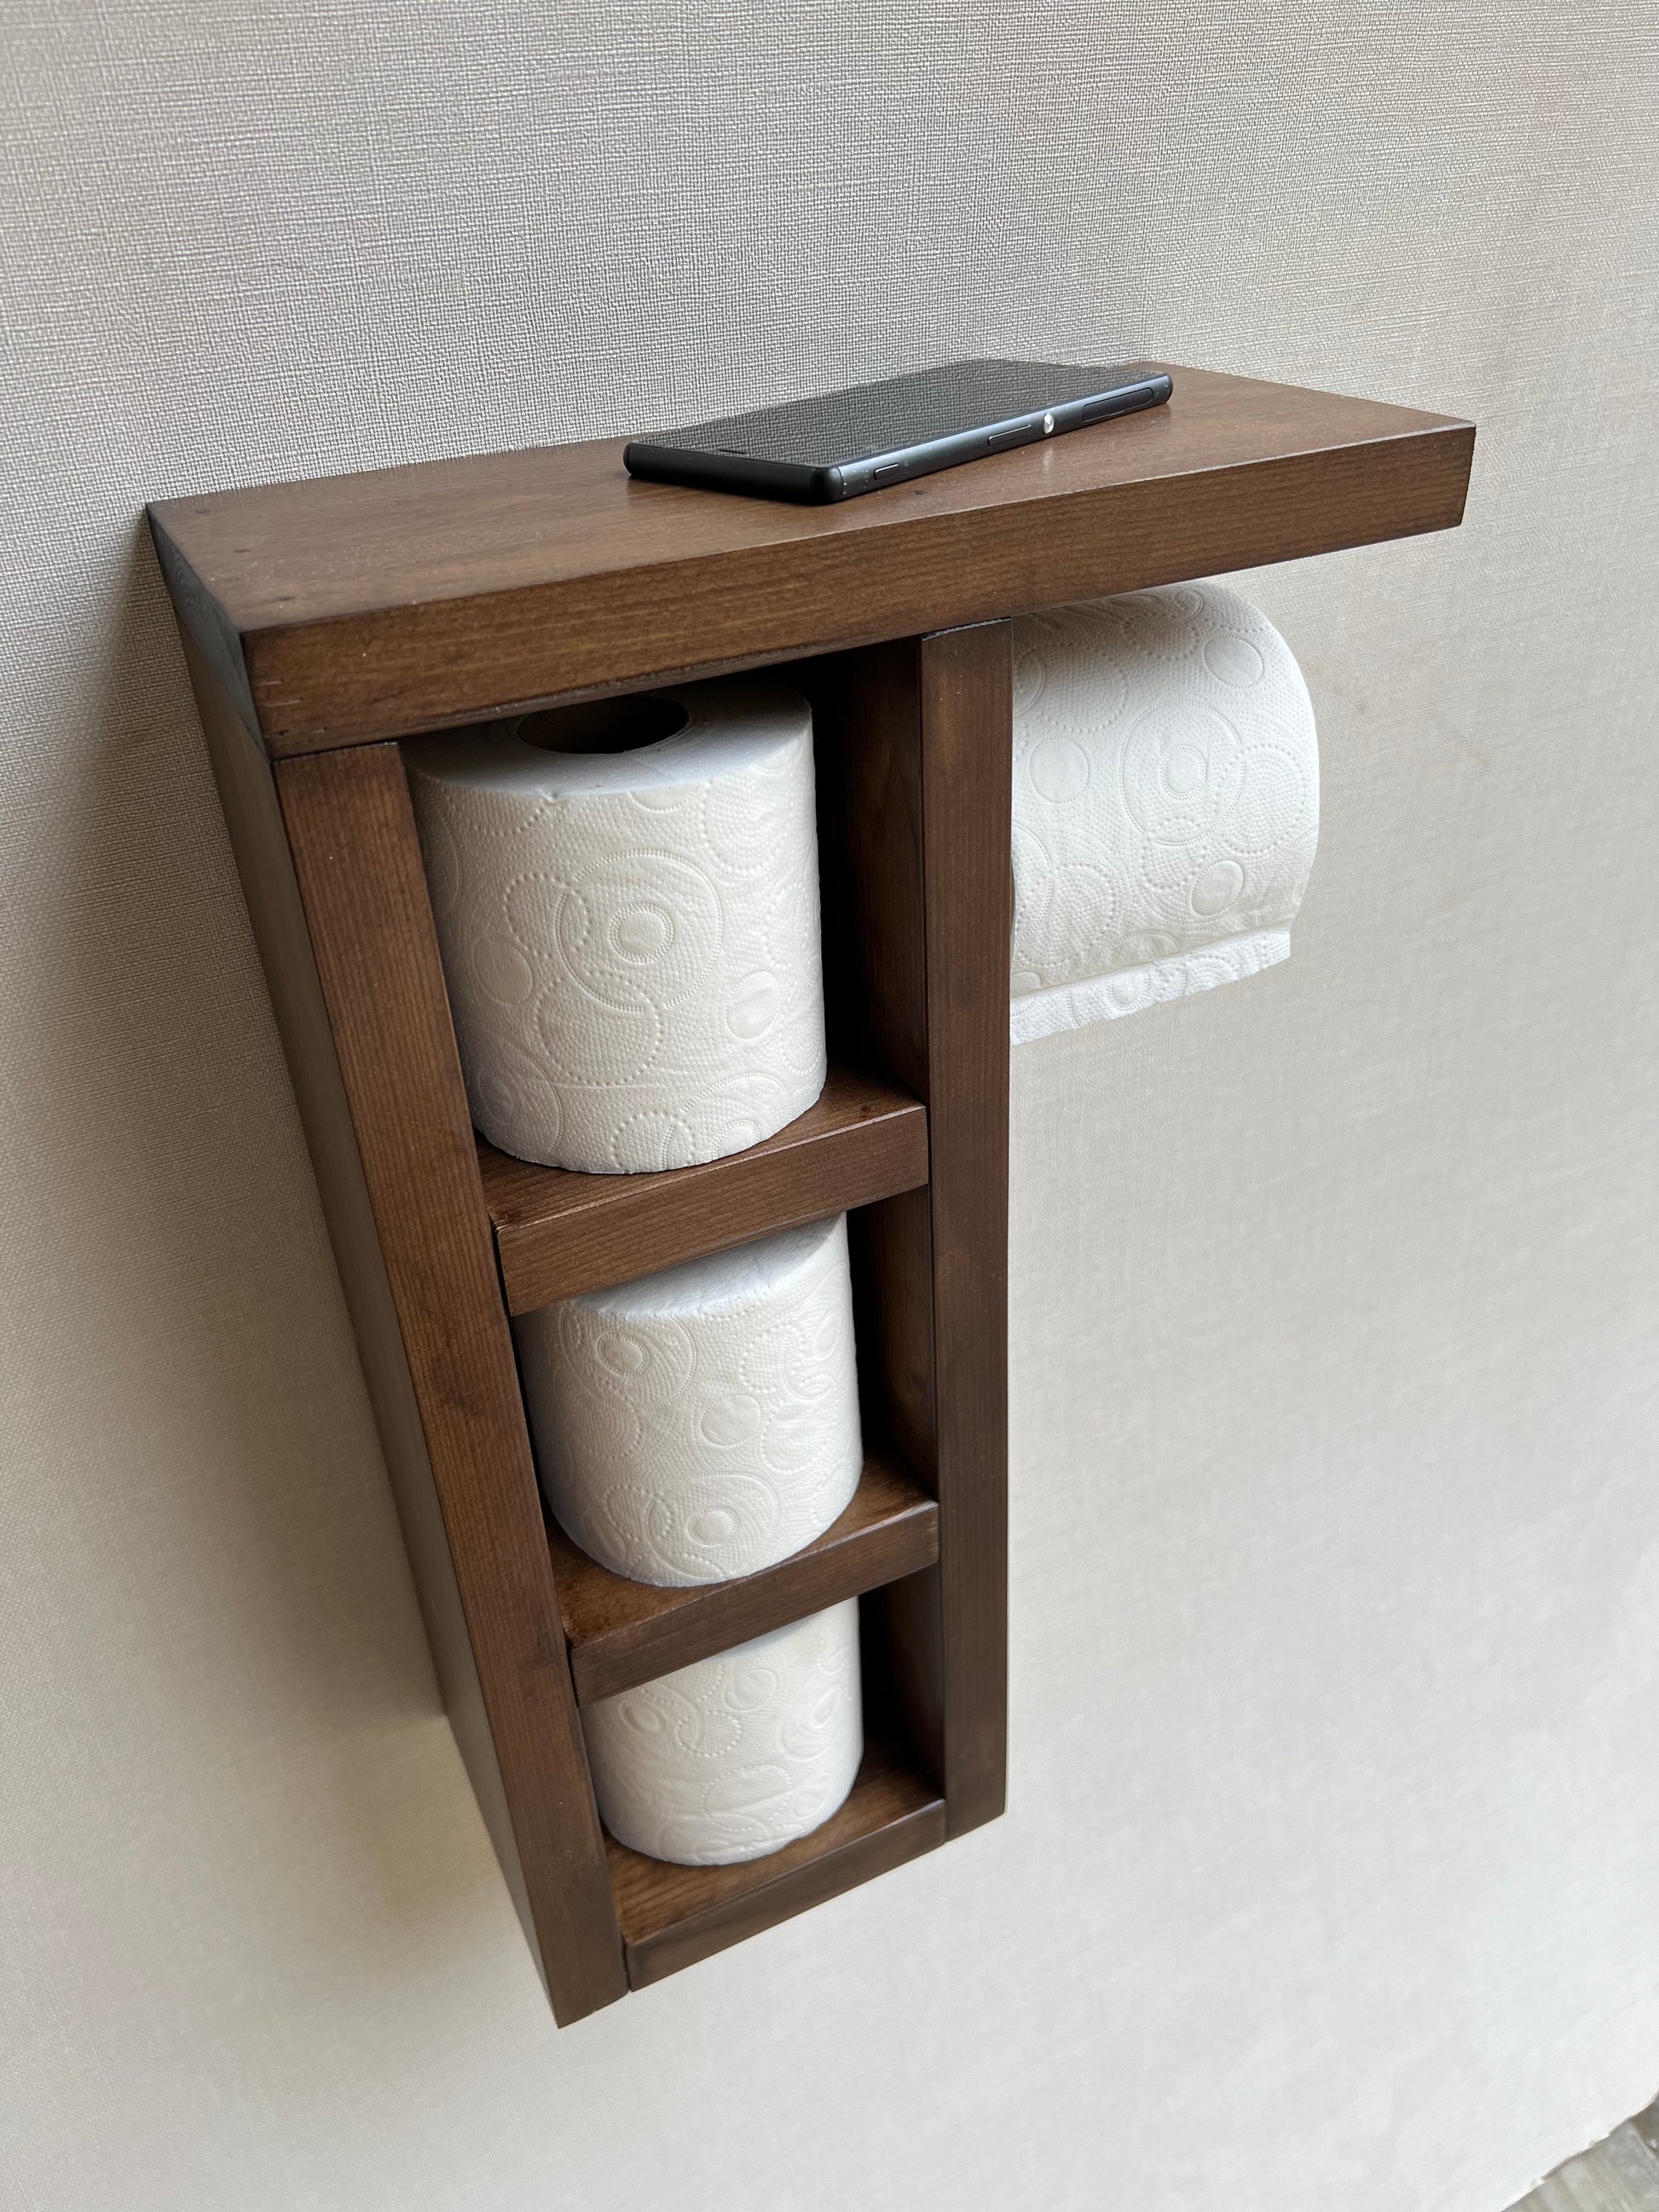 Rustic Wood Toilet Paper Holder Wall Mounted